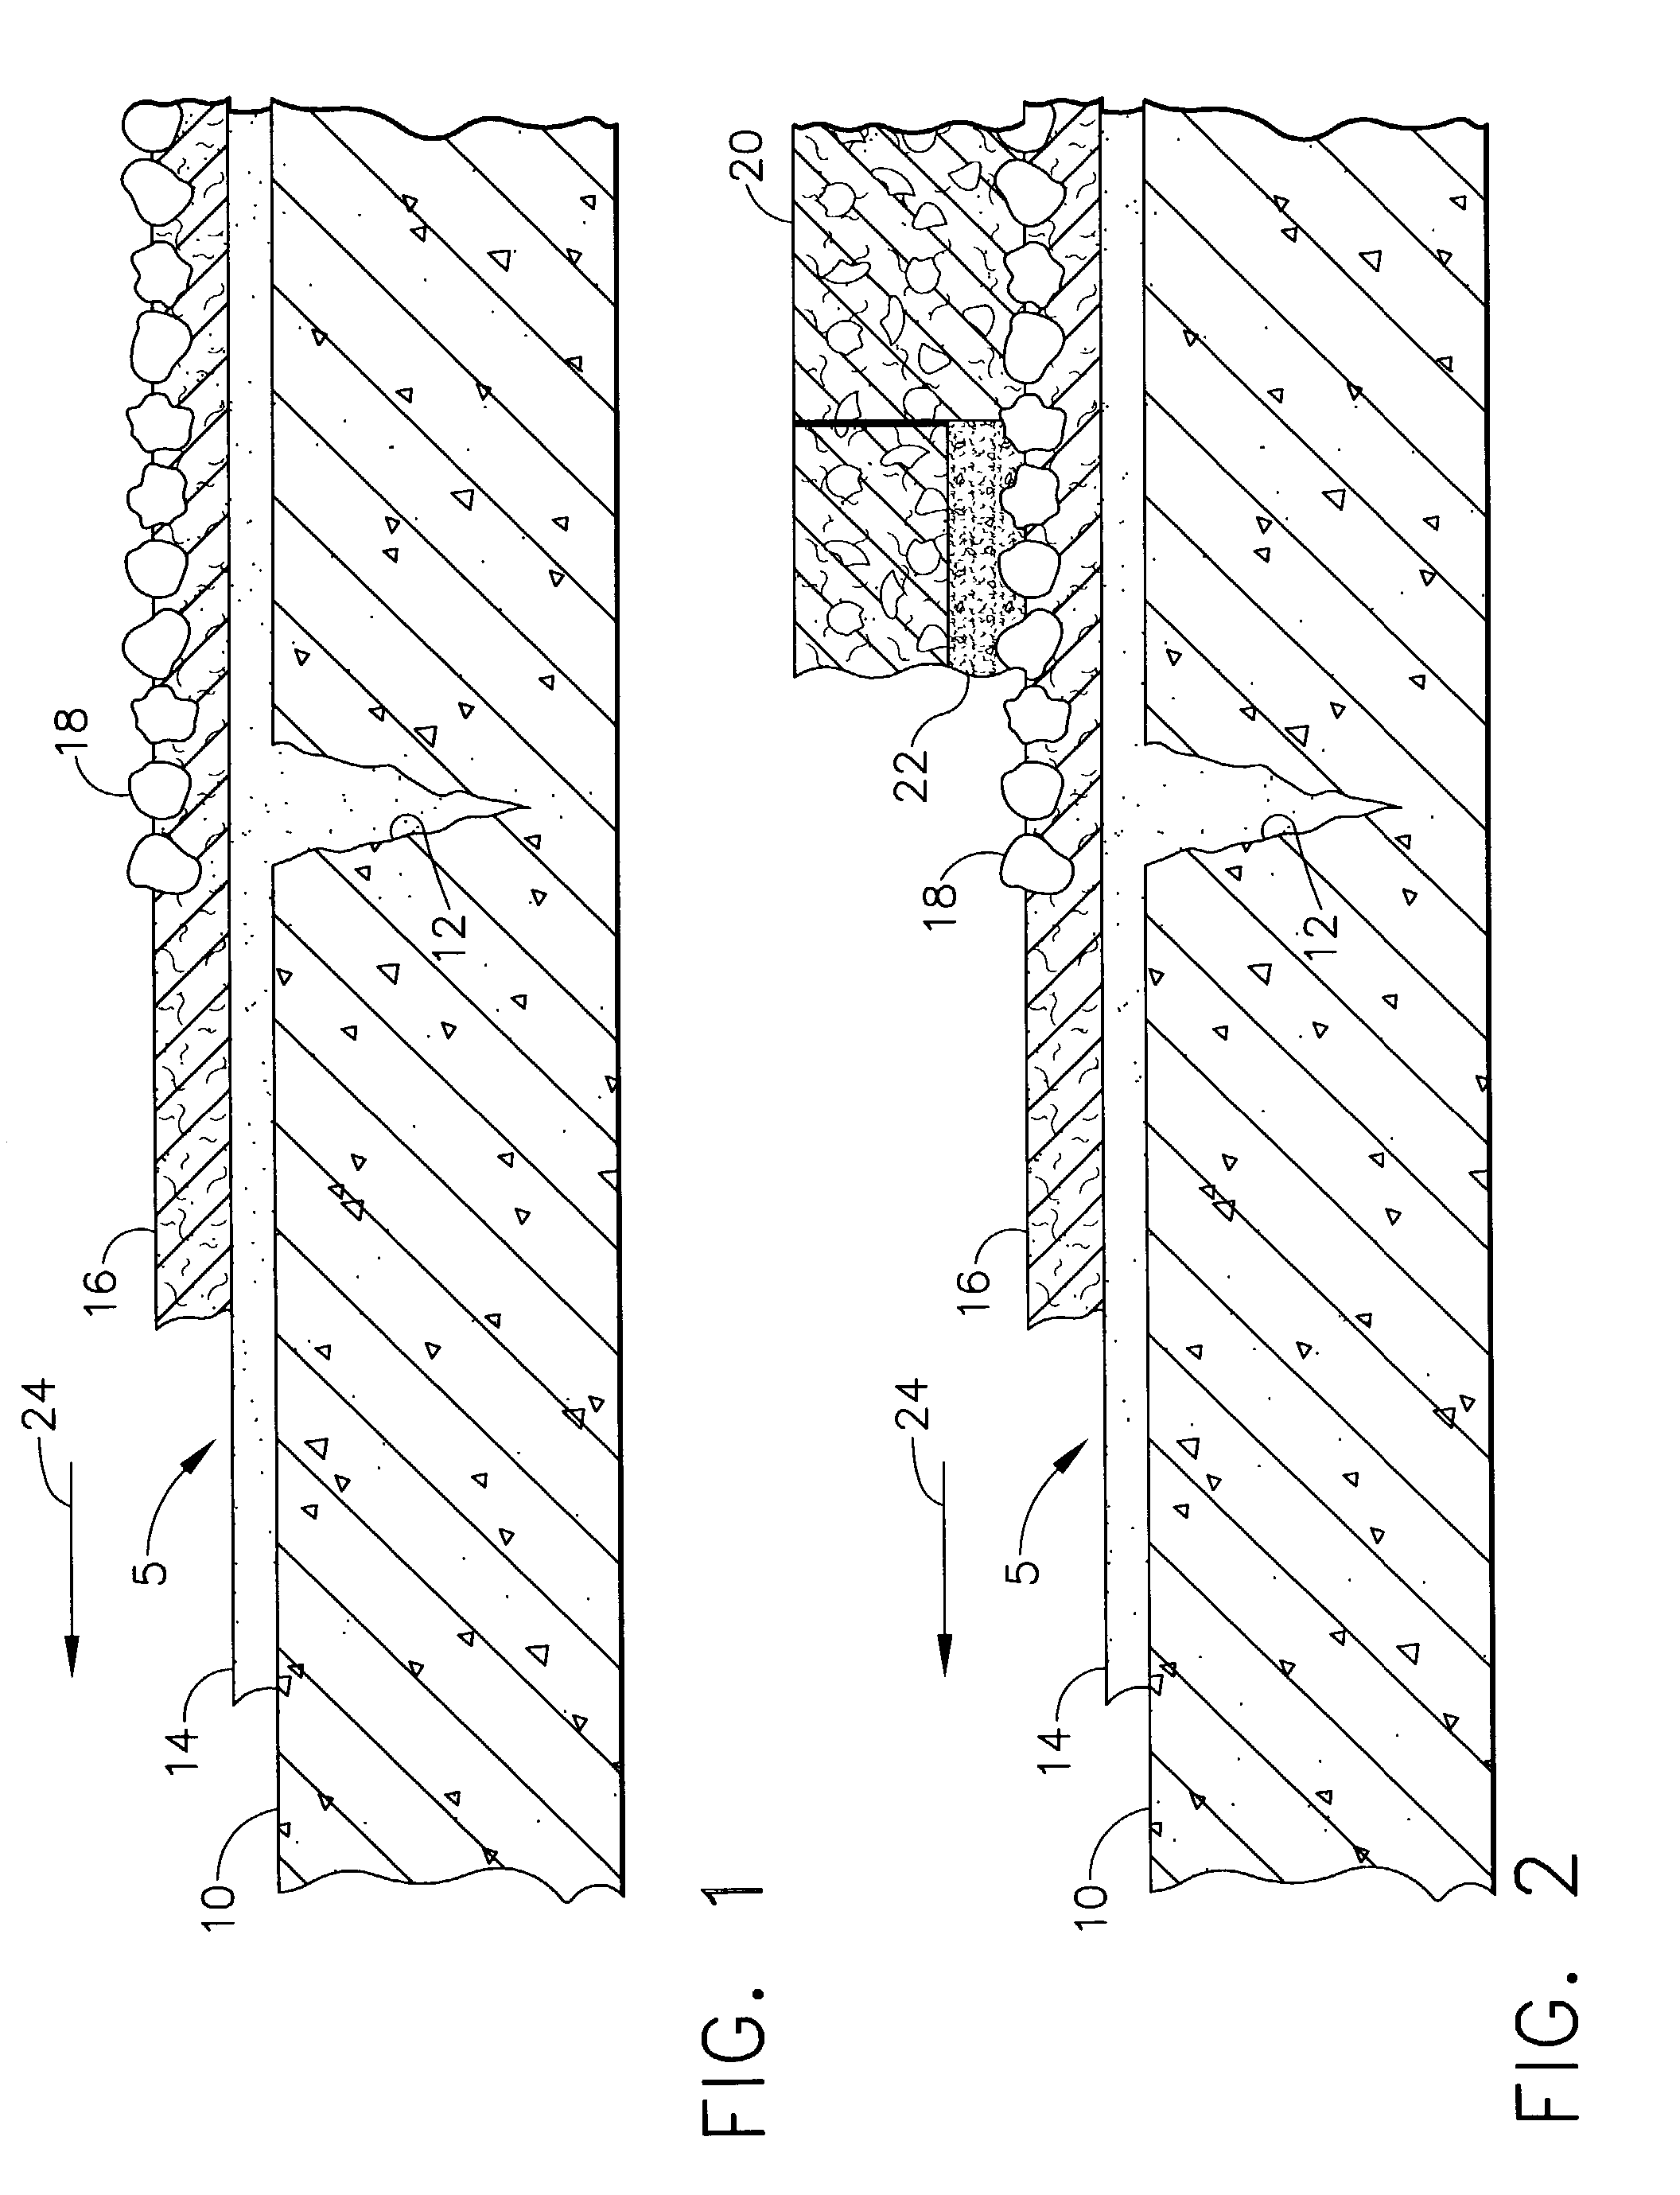 Apparatus for treating a pavement surface